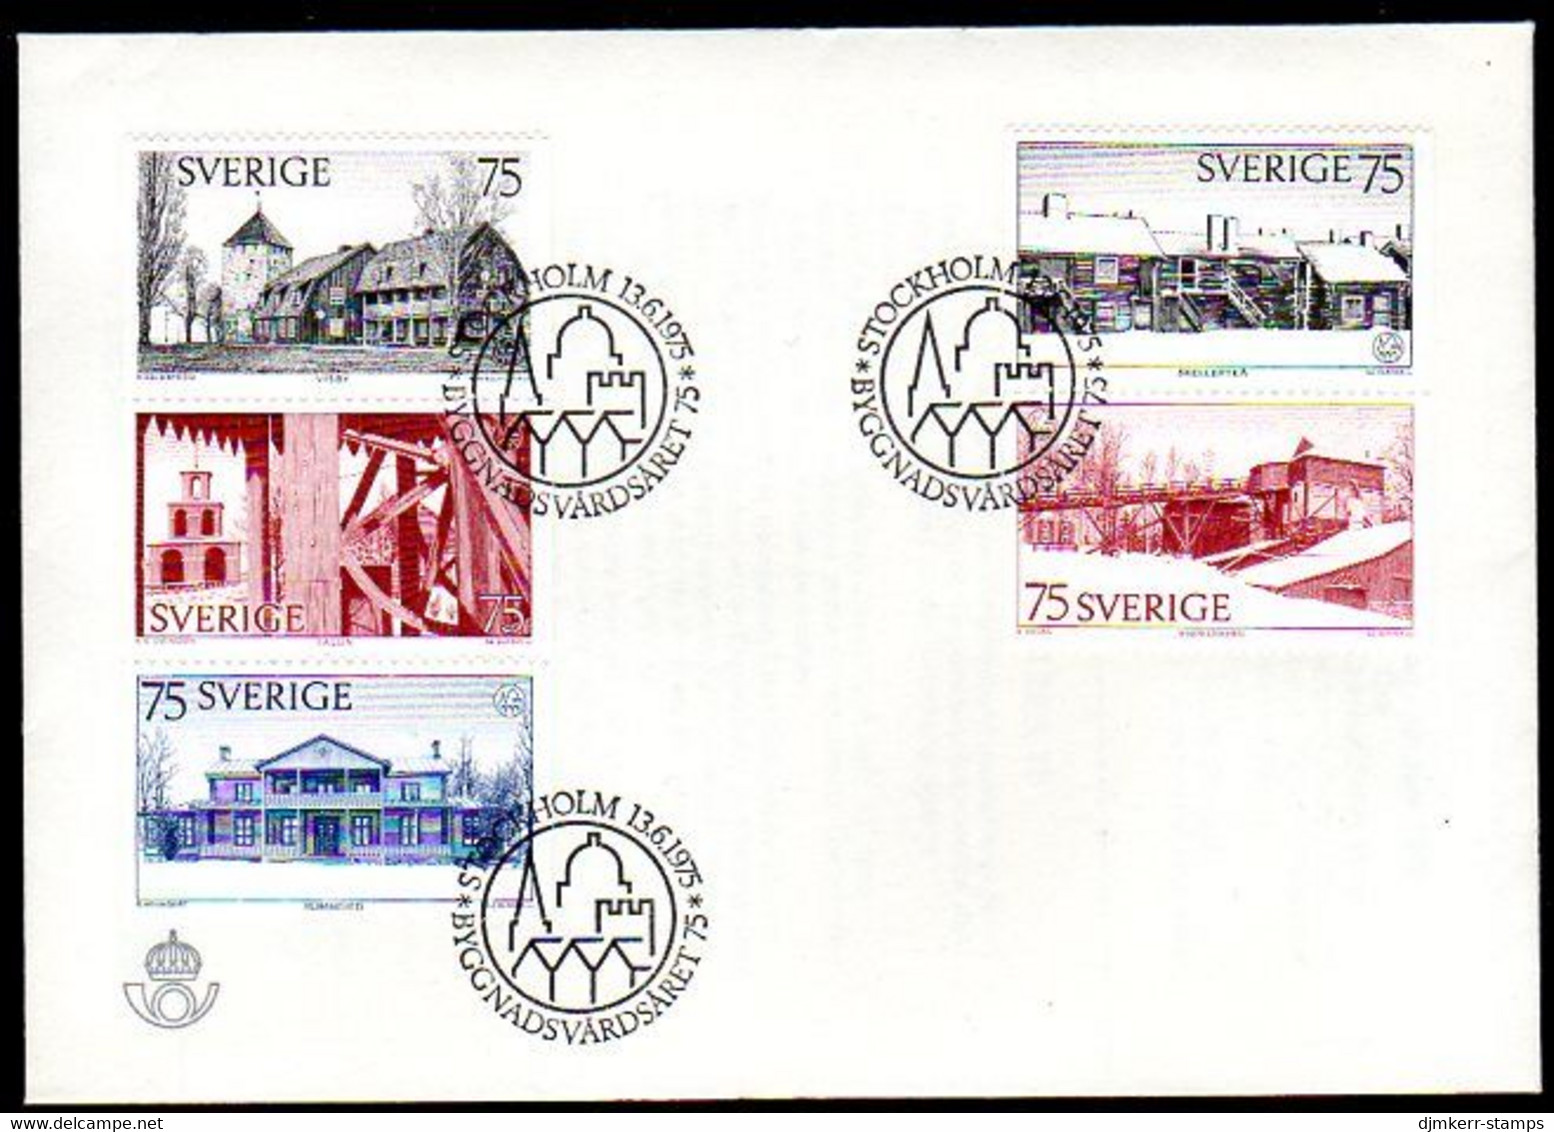 SWEDEN 1975 Protection Of Architectural Heritage FDC.  Michel 908-12 - FDC